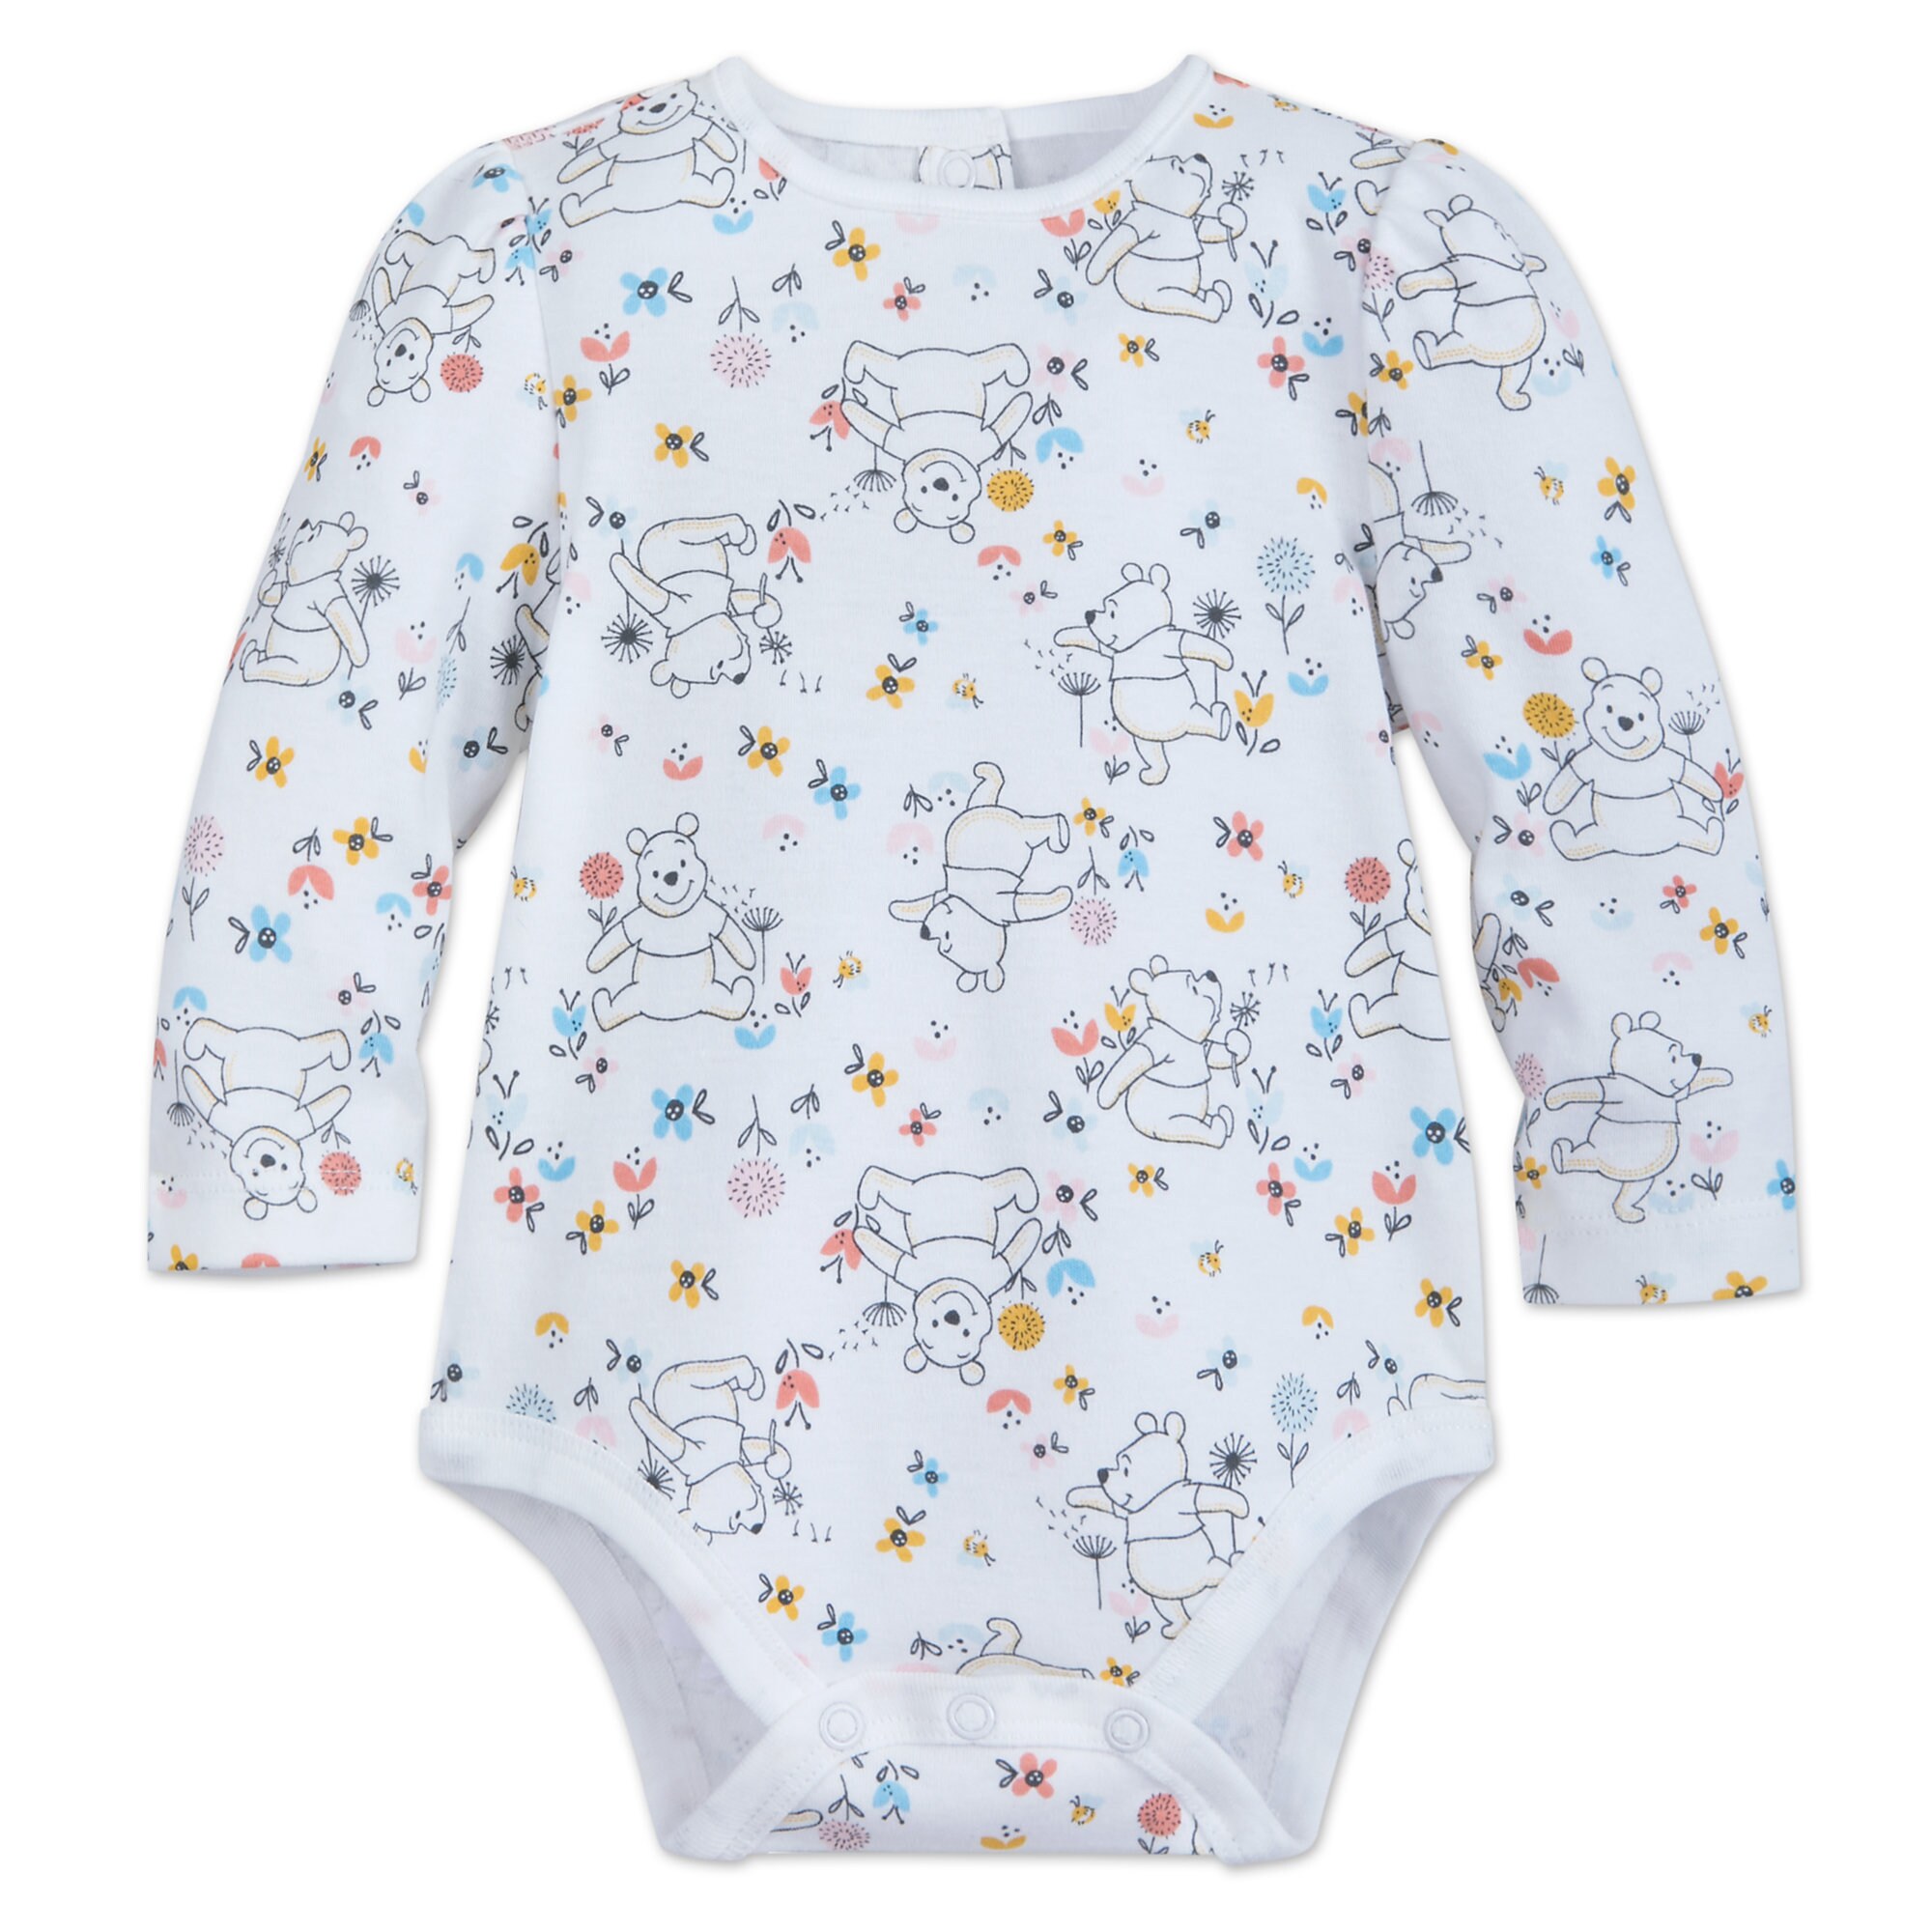 Winnie the Pooh Jumper Set for Baby